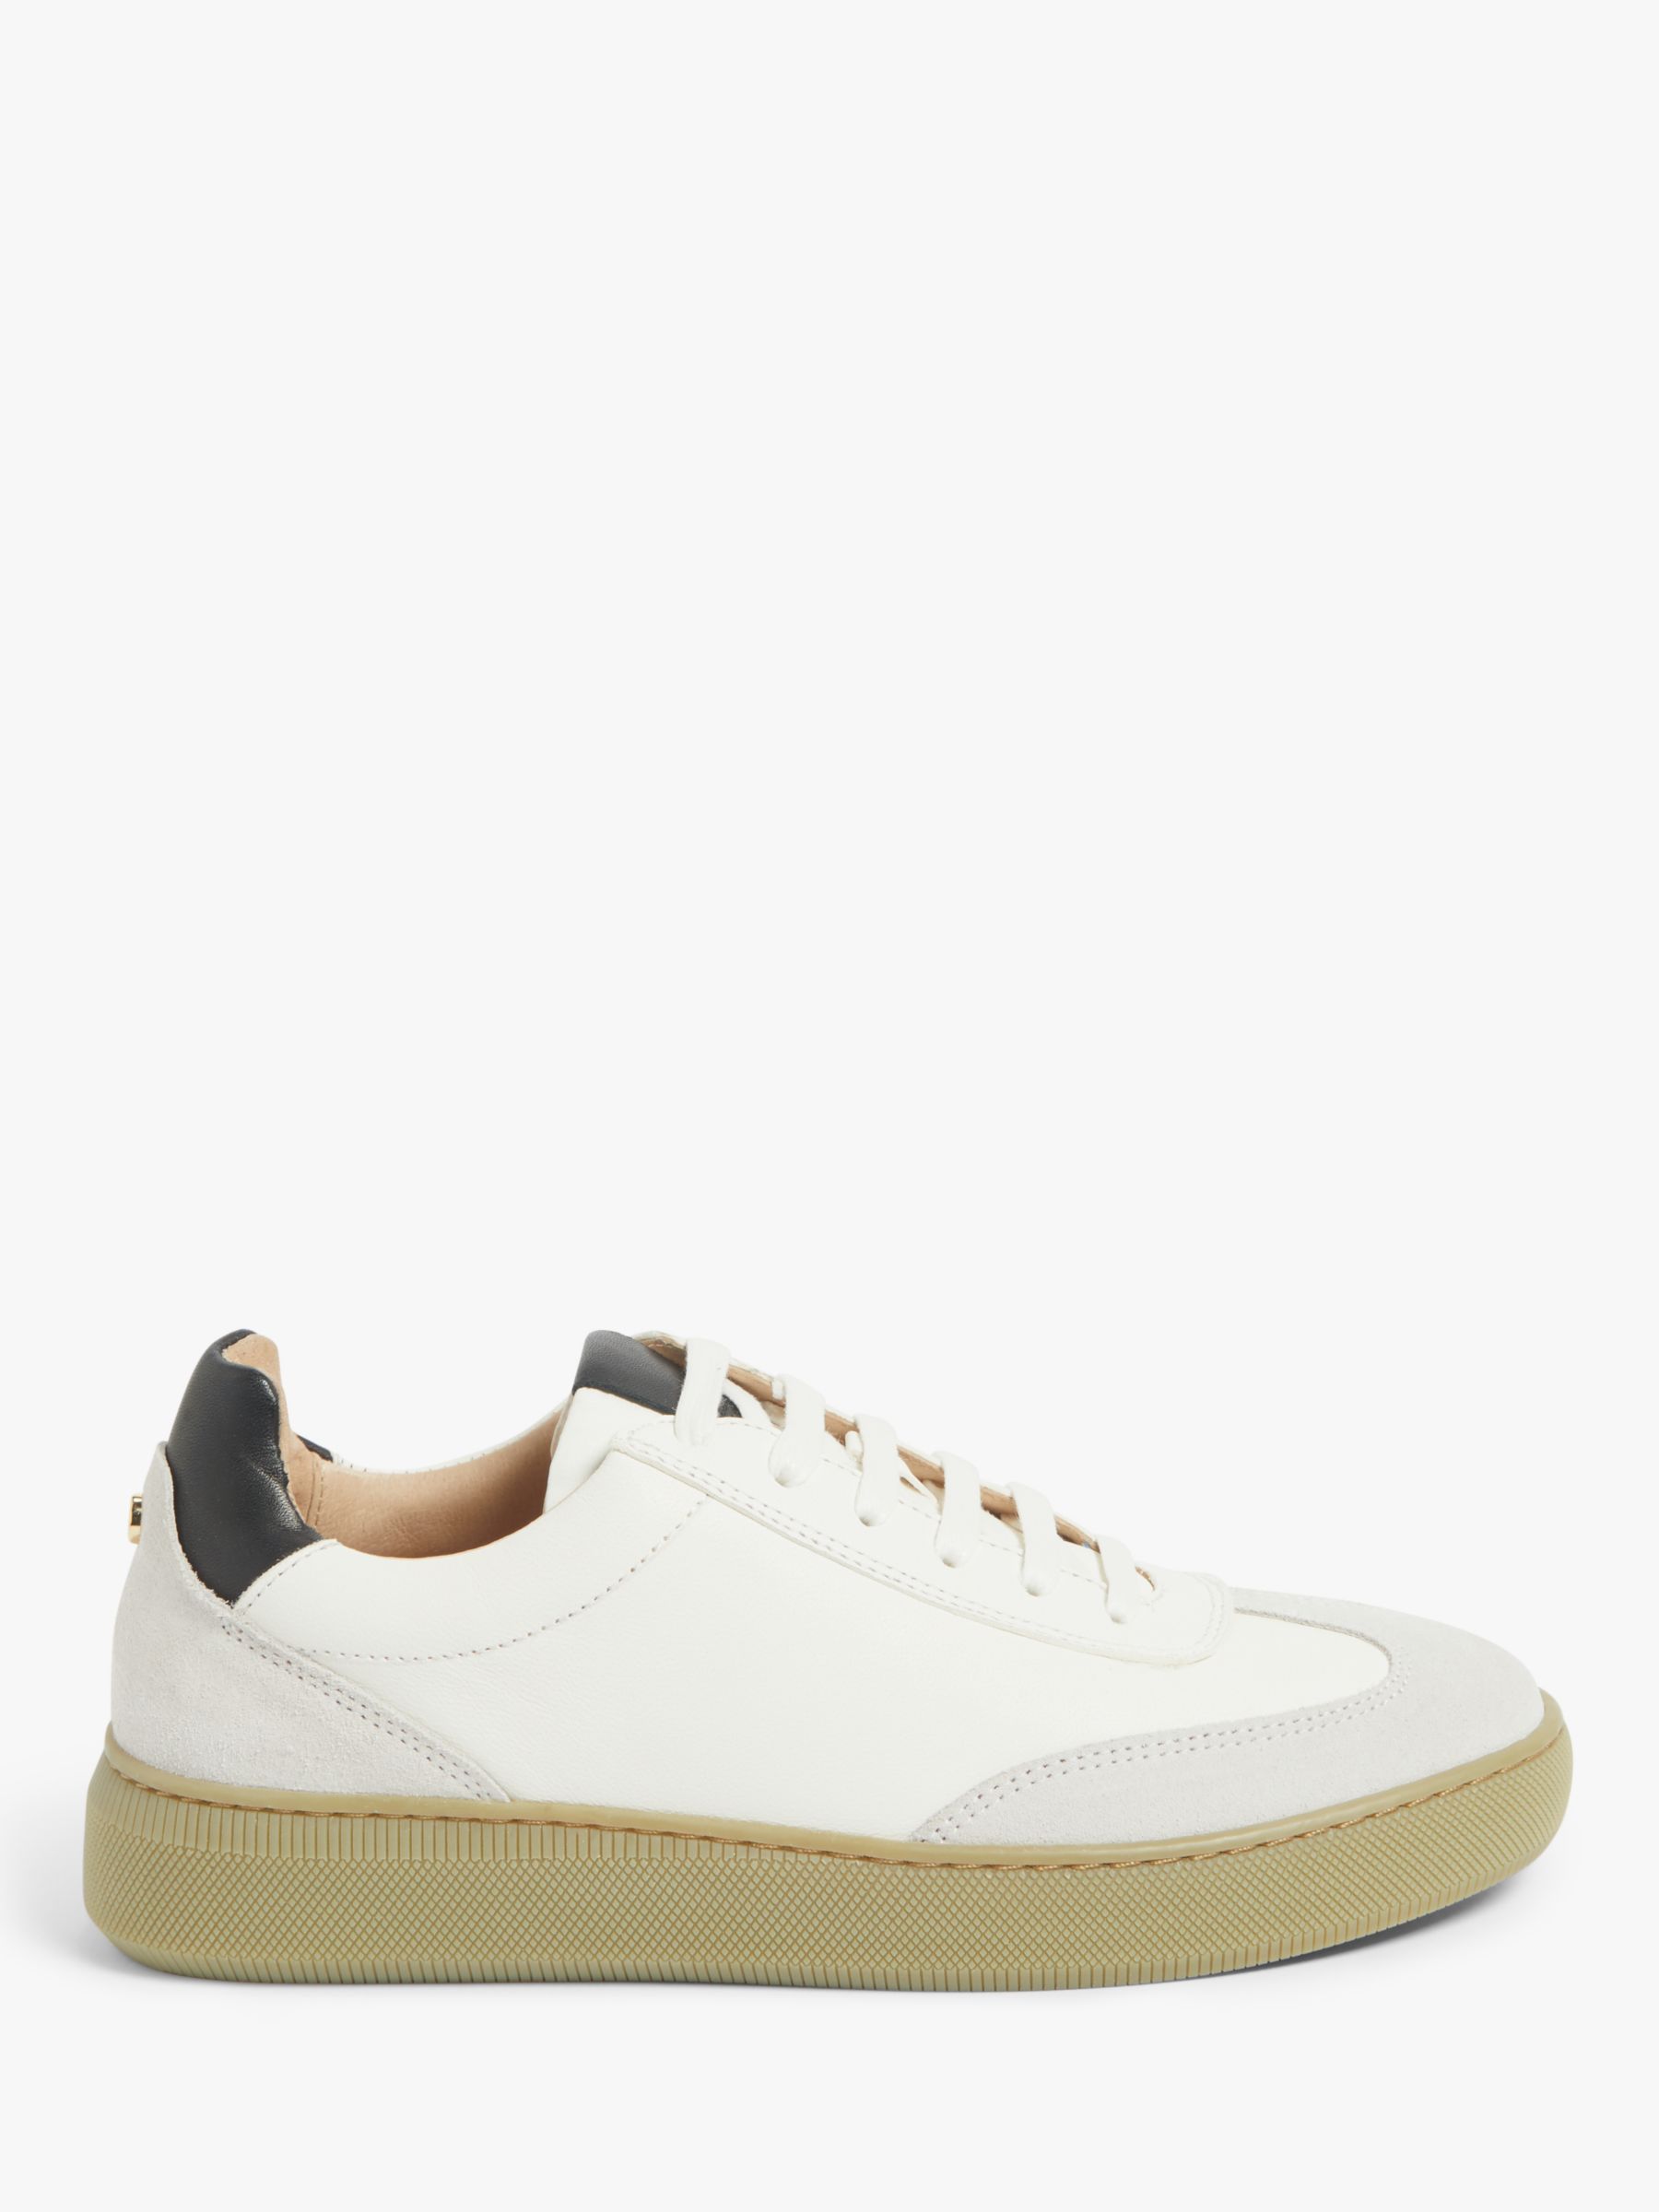 John Lewis Fern Leather Trainers, White at John Lewis & Partners